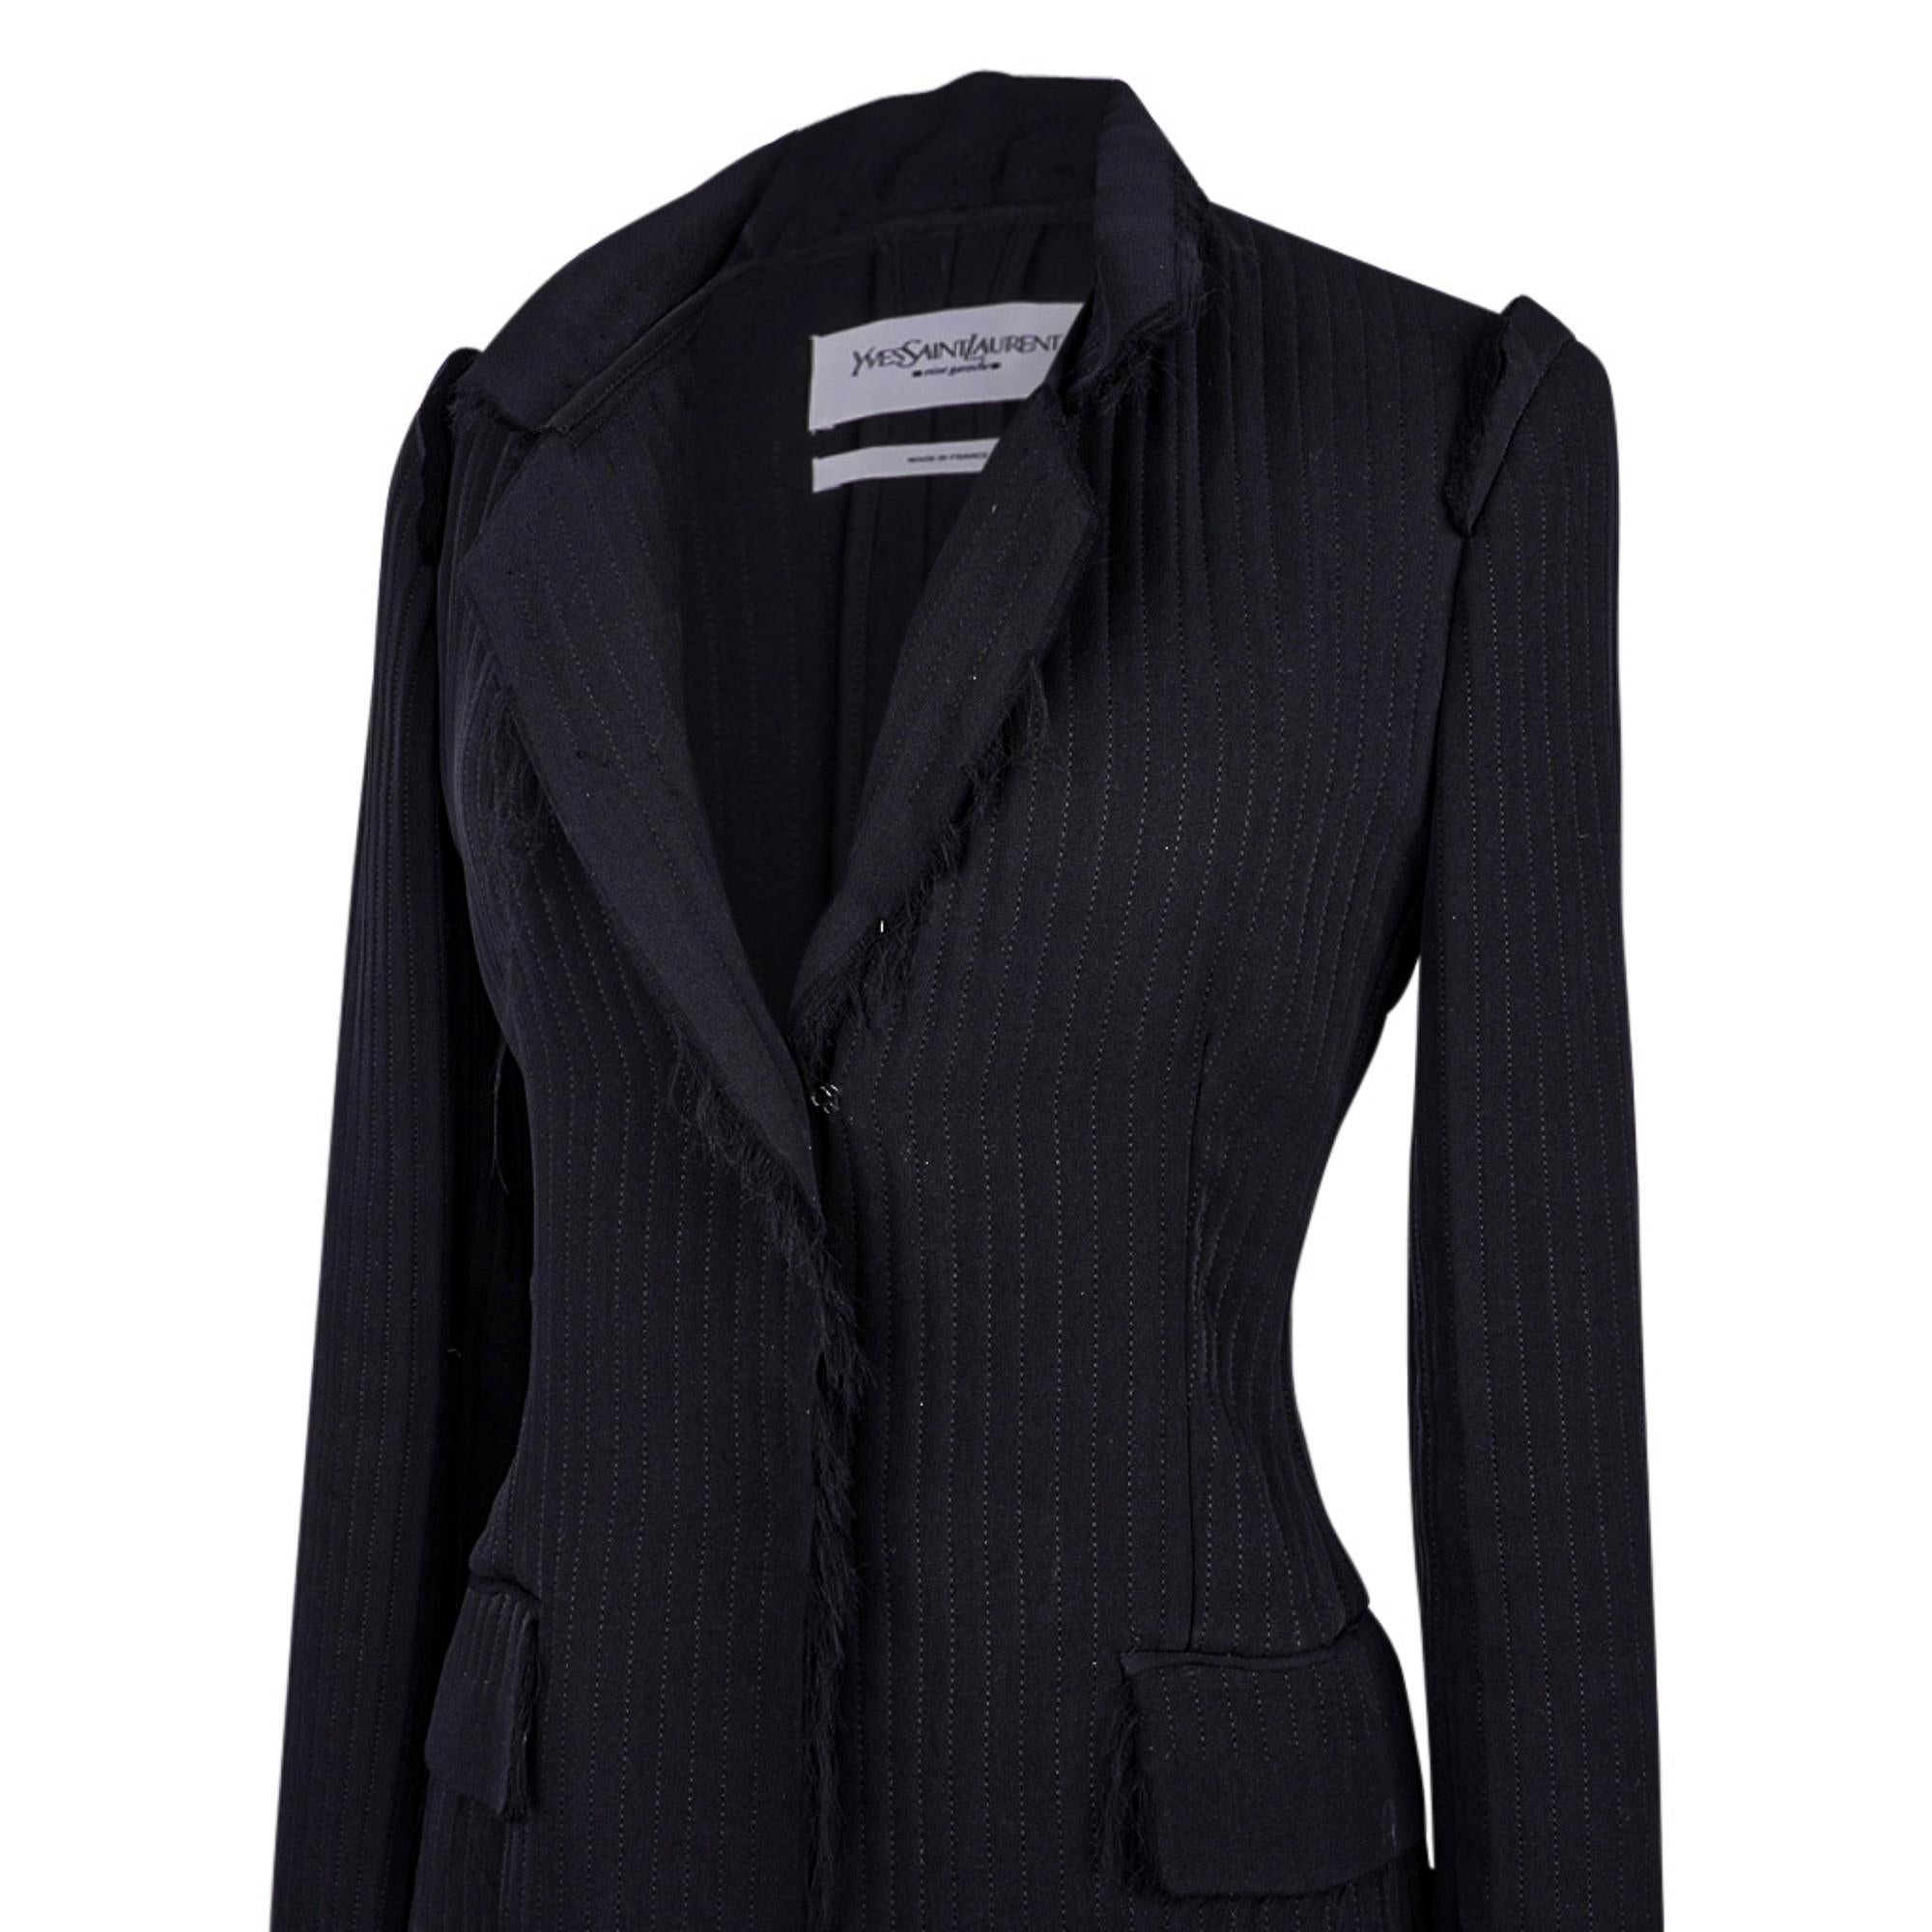 Yves Saint Laurent Jacket Exquisite Tom Ford Creation in Layers 36 2